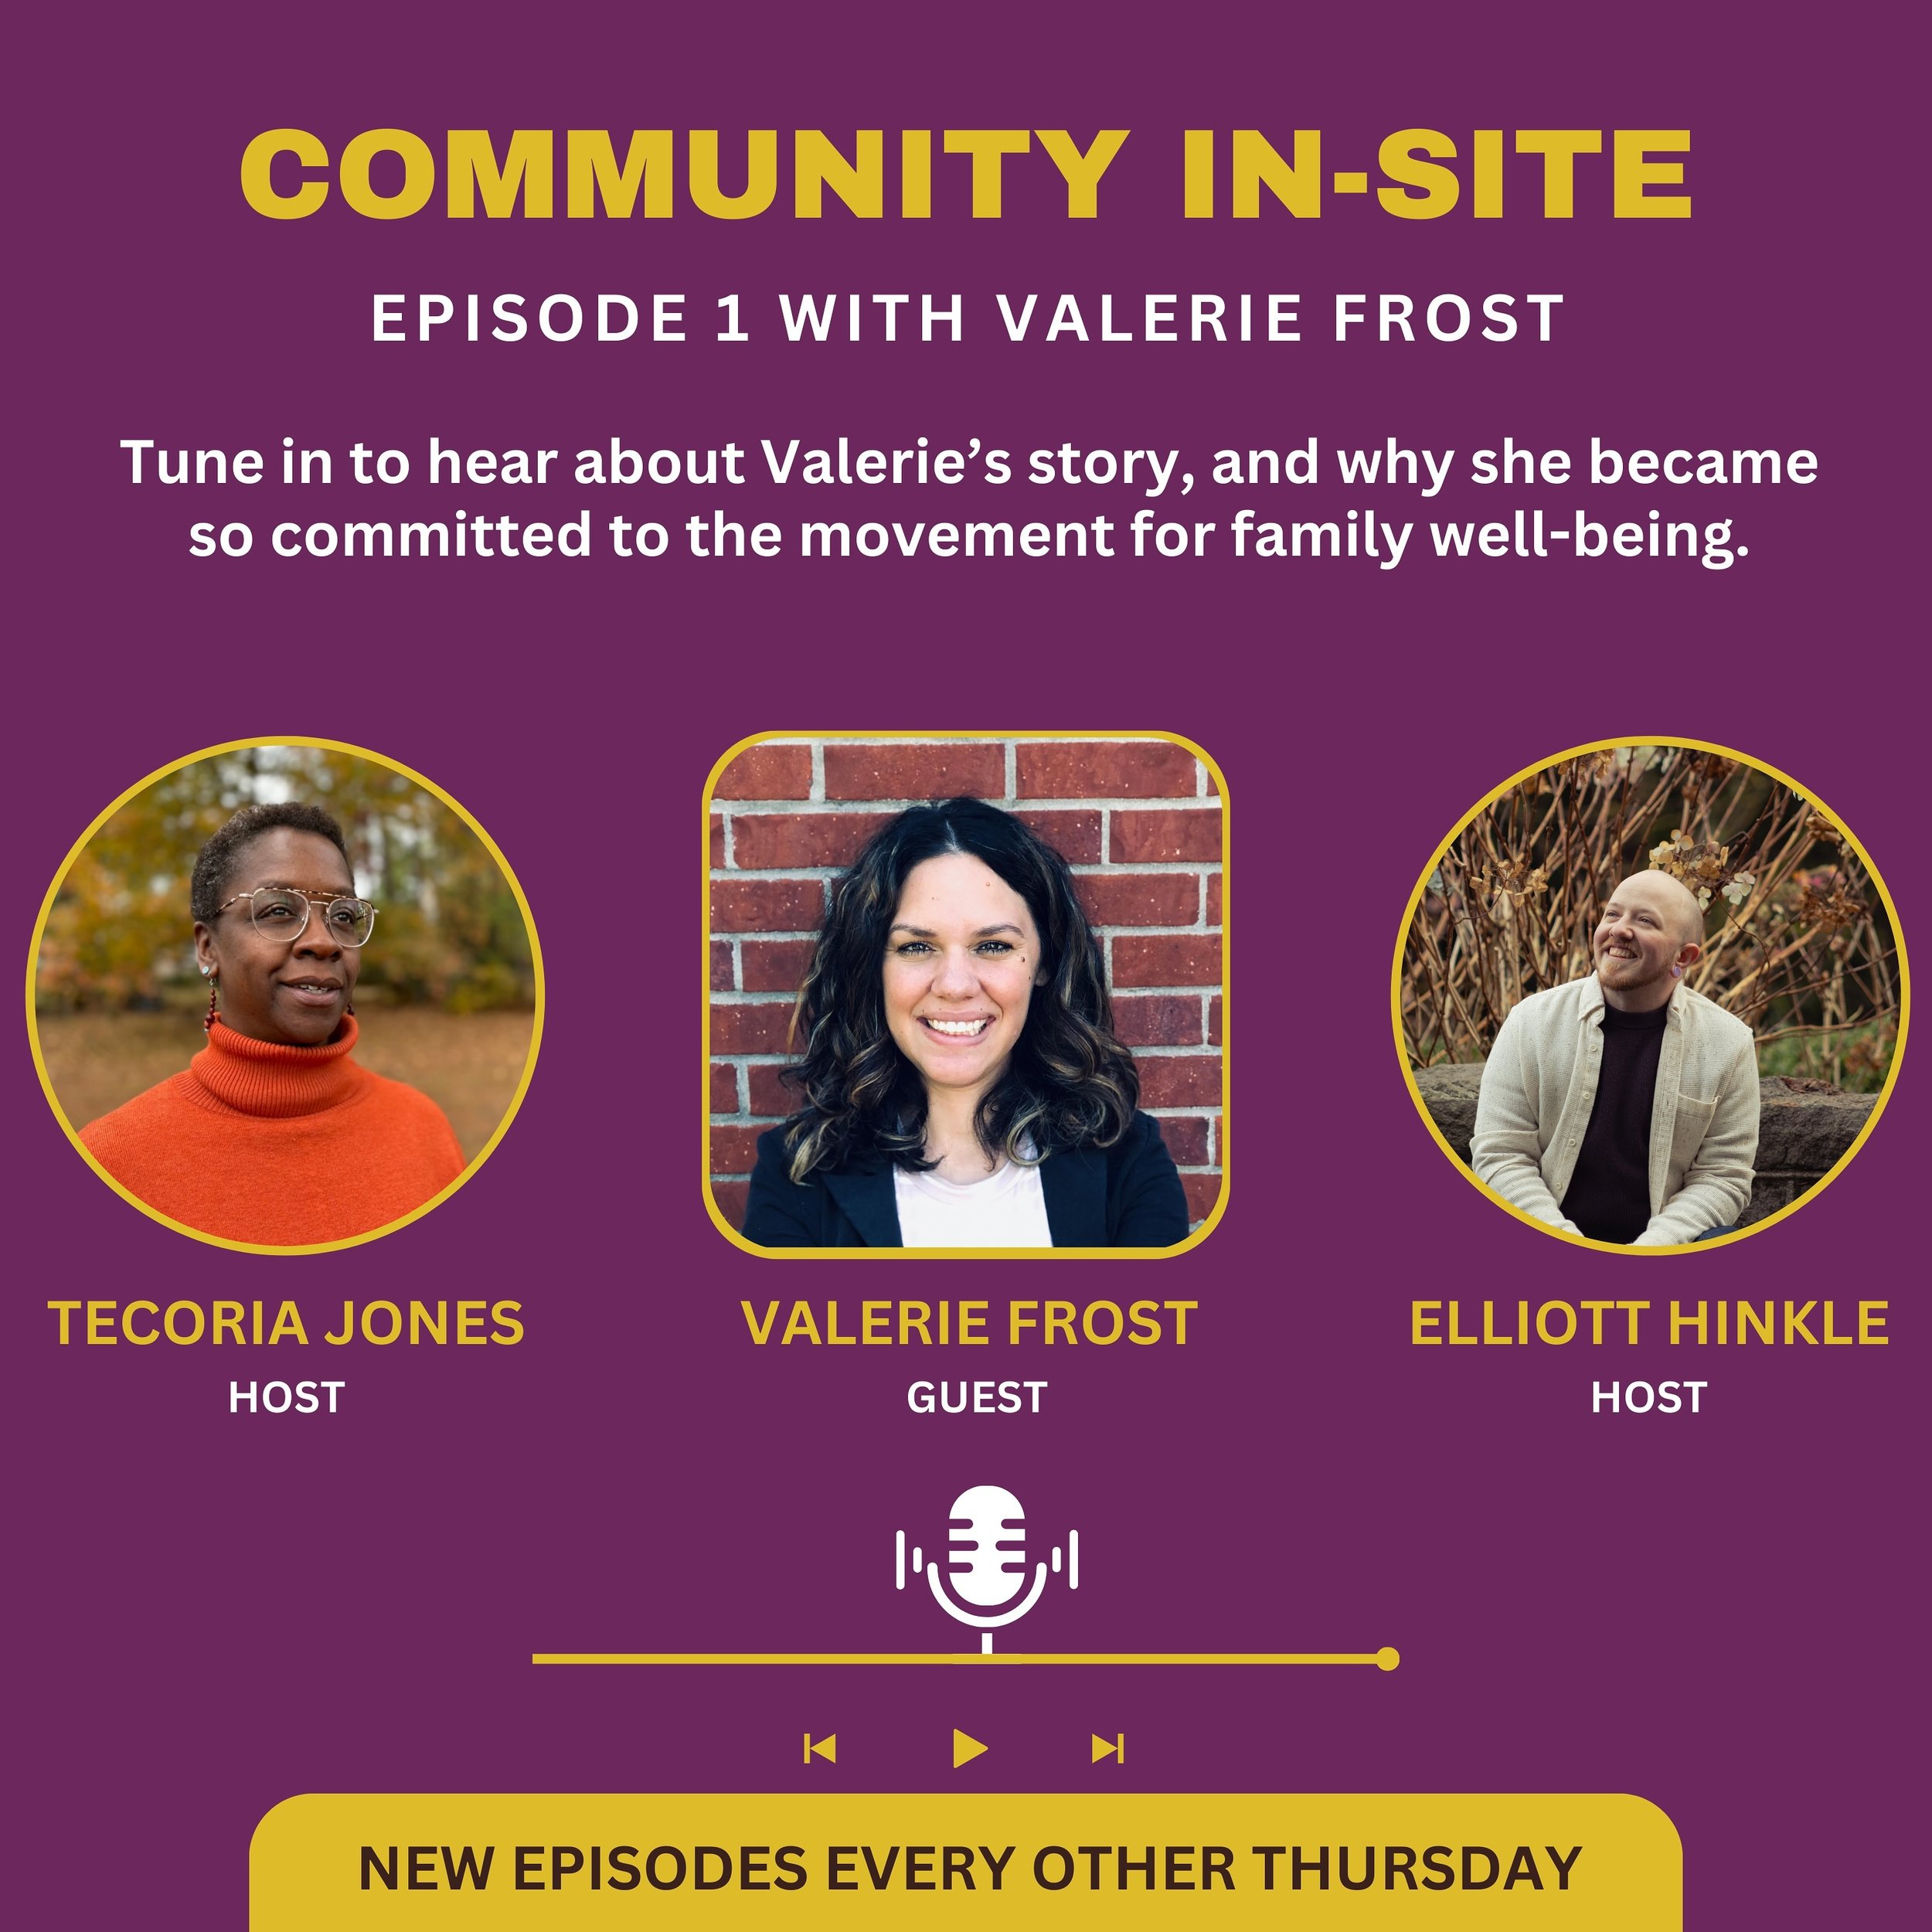 🎙️The first episode of the Community In-Site podcast dropped this morning, wherever you get your podcasts. (Link in bio) 

Subscribe to &ldquo;Community In-Site&rdquo; and be part of a growing community dedicated to family well-being! 🦄

#Community